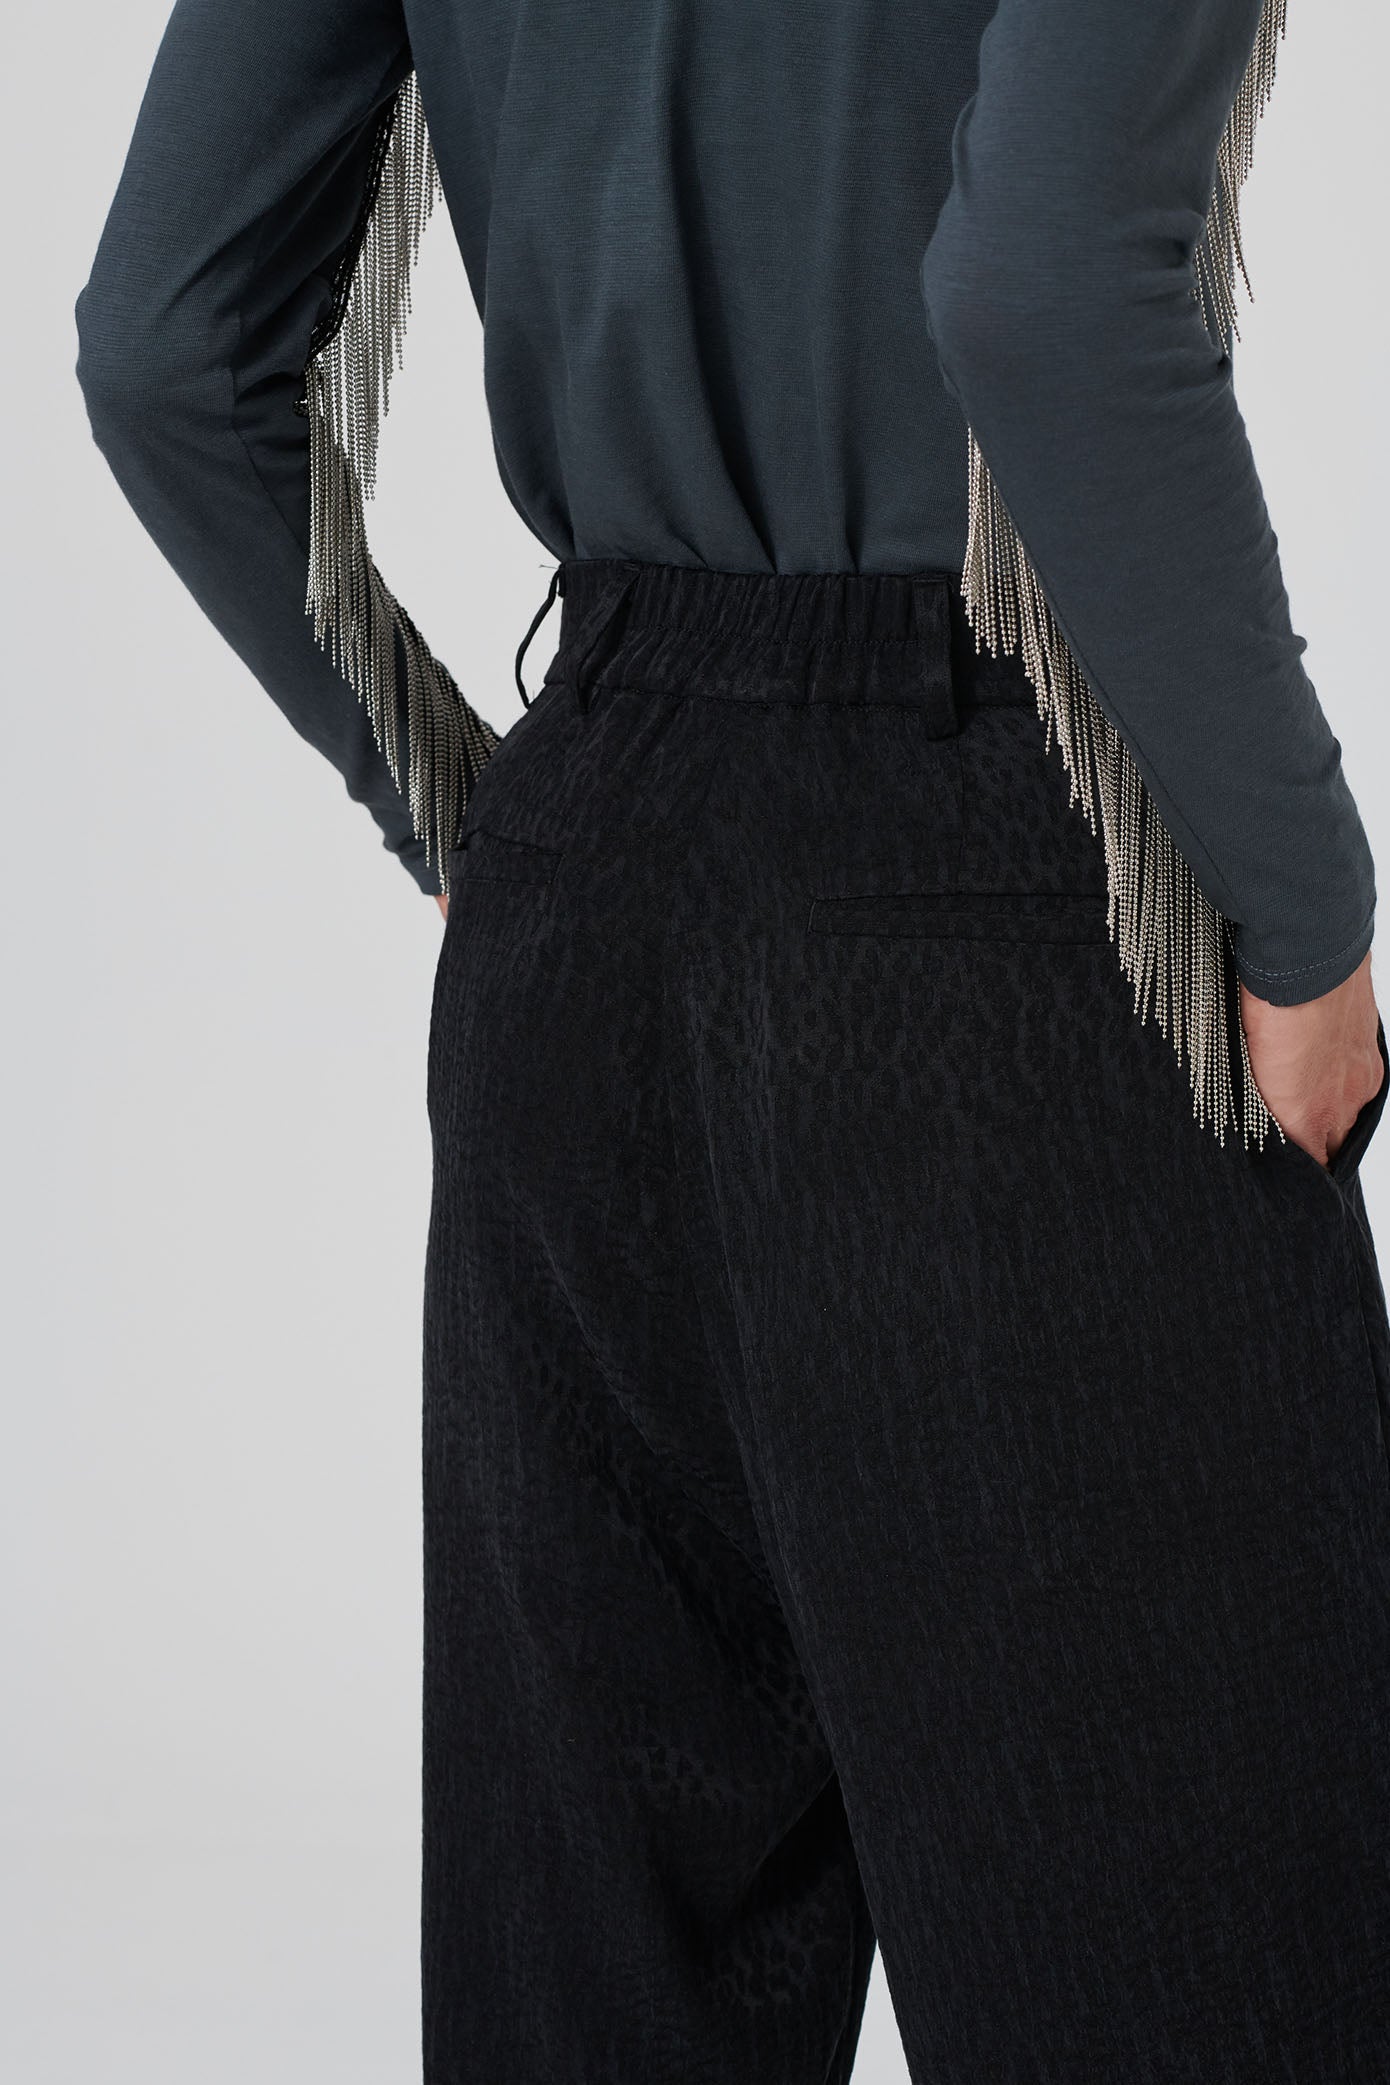 SOPHIETTA trousers in black Leo jacquard by LOVJOI made of Cupro and Ecovero™